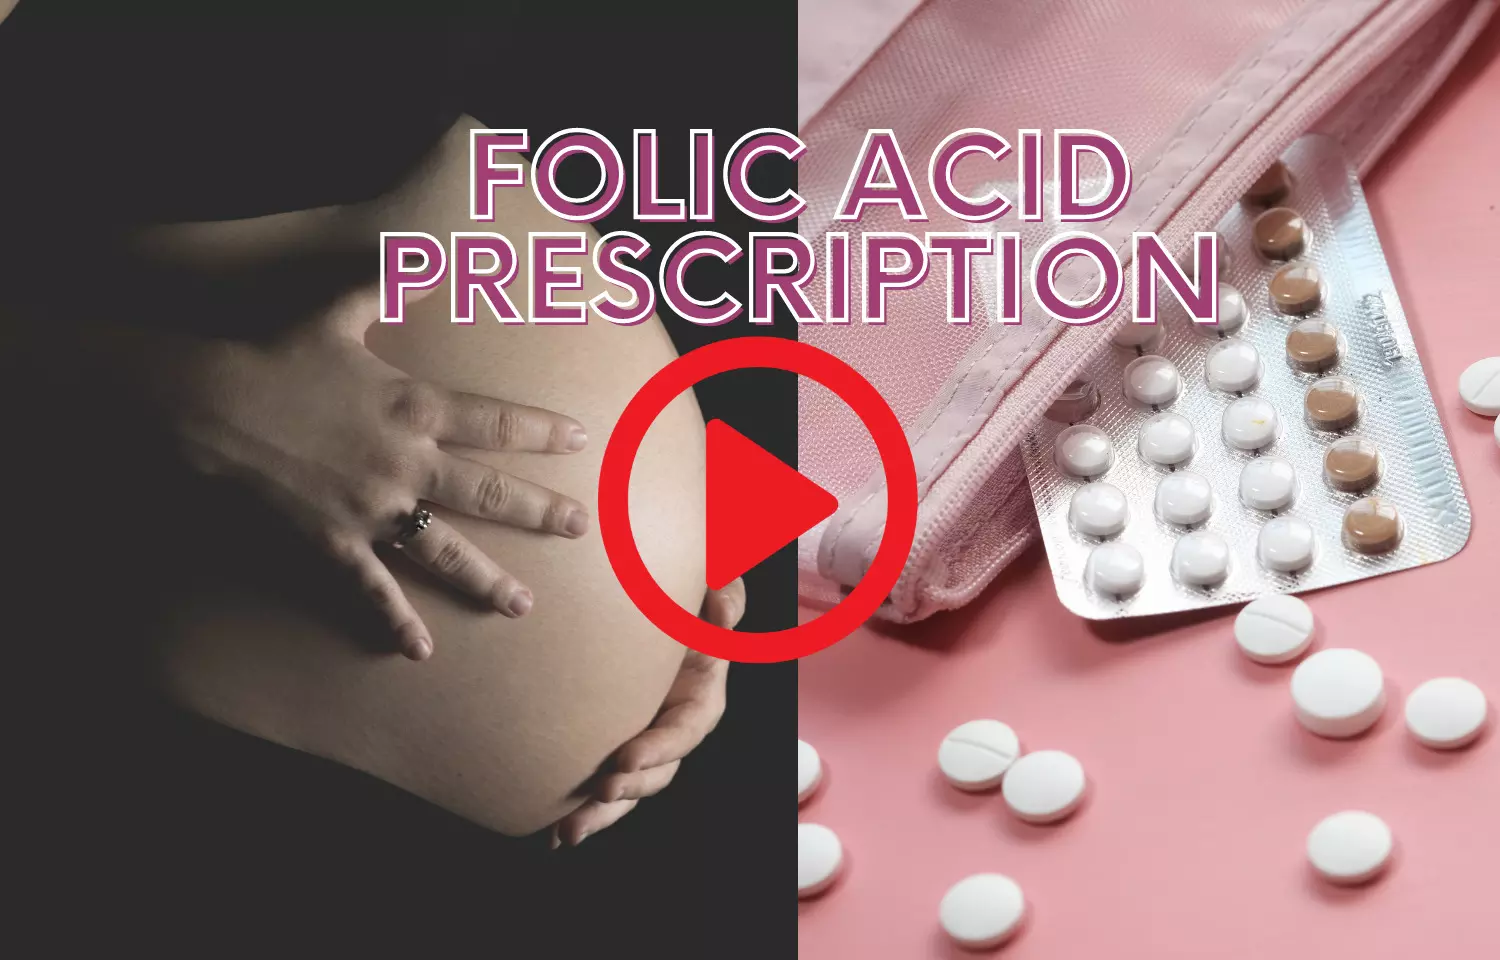 Importance of Folic Acid - Why it is routine prescription during pregnancy?